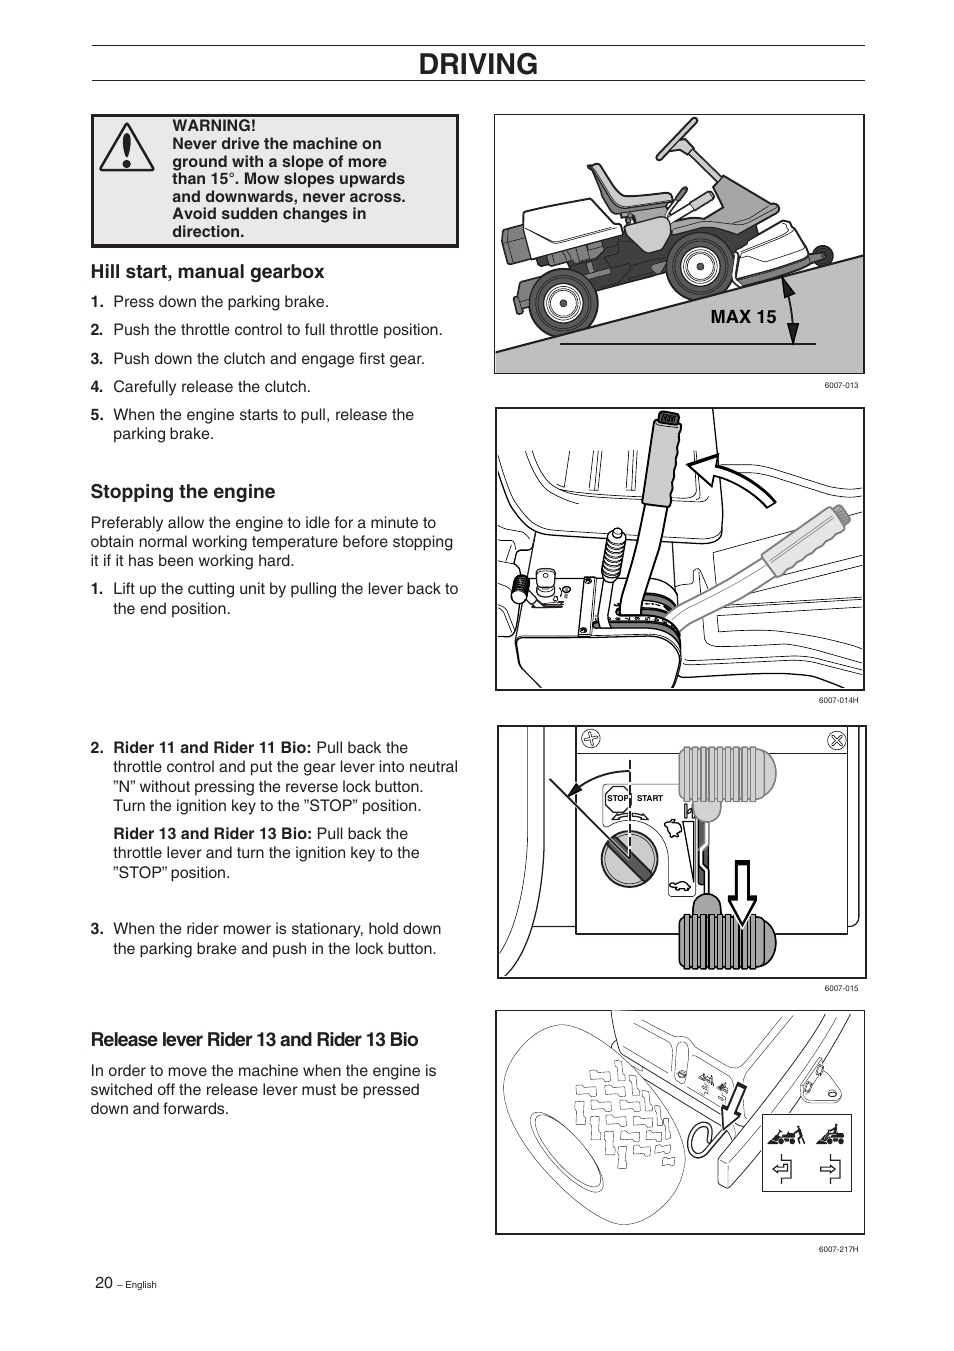 Driving, Release lever rider 13 and rider 13 bio, Hill start, manual  gearbox | Husqvarna Rider 11 User Manual | Page 22 / 52 | Original mode